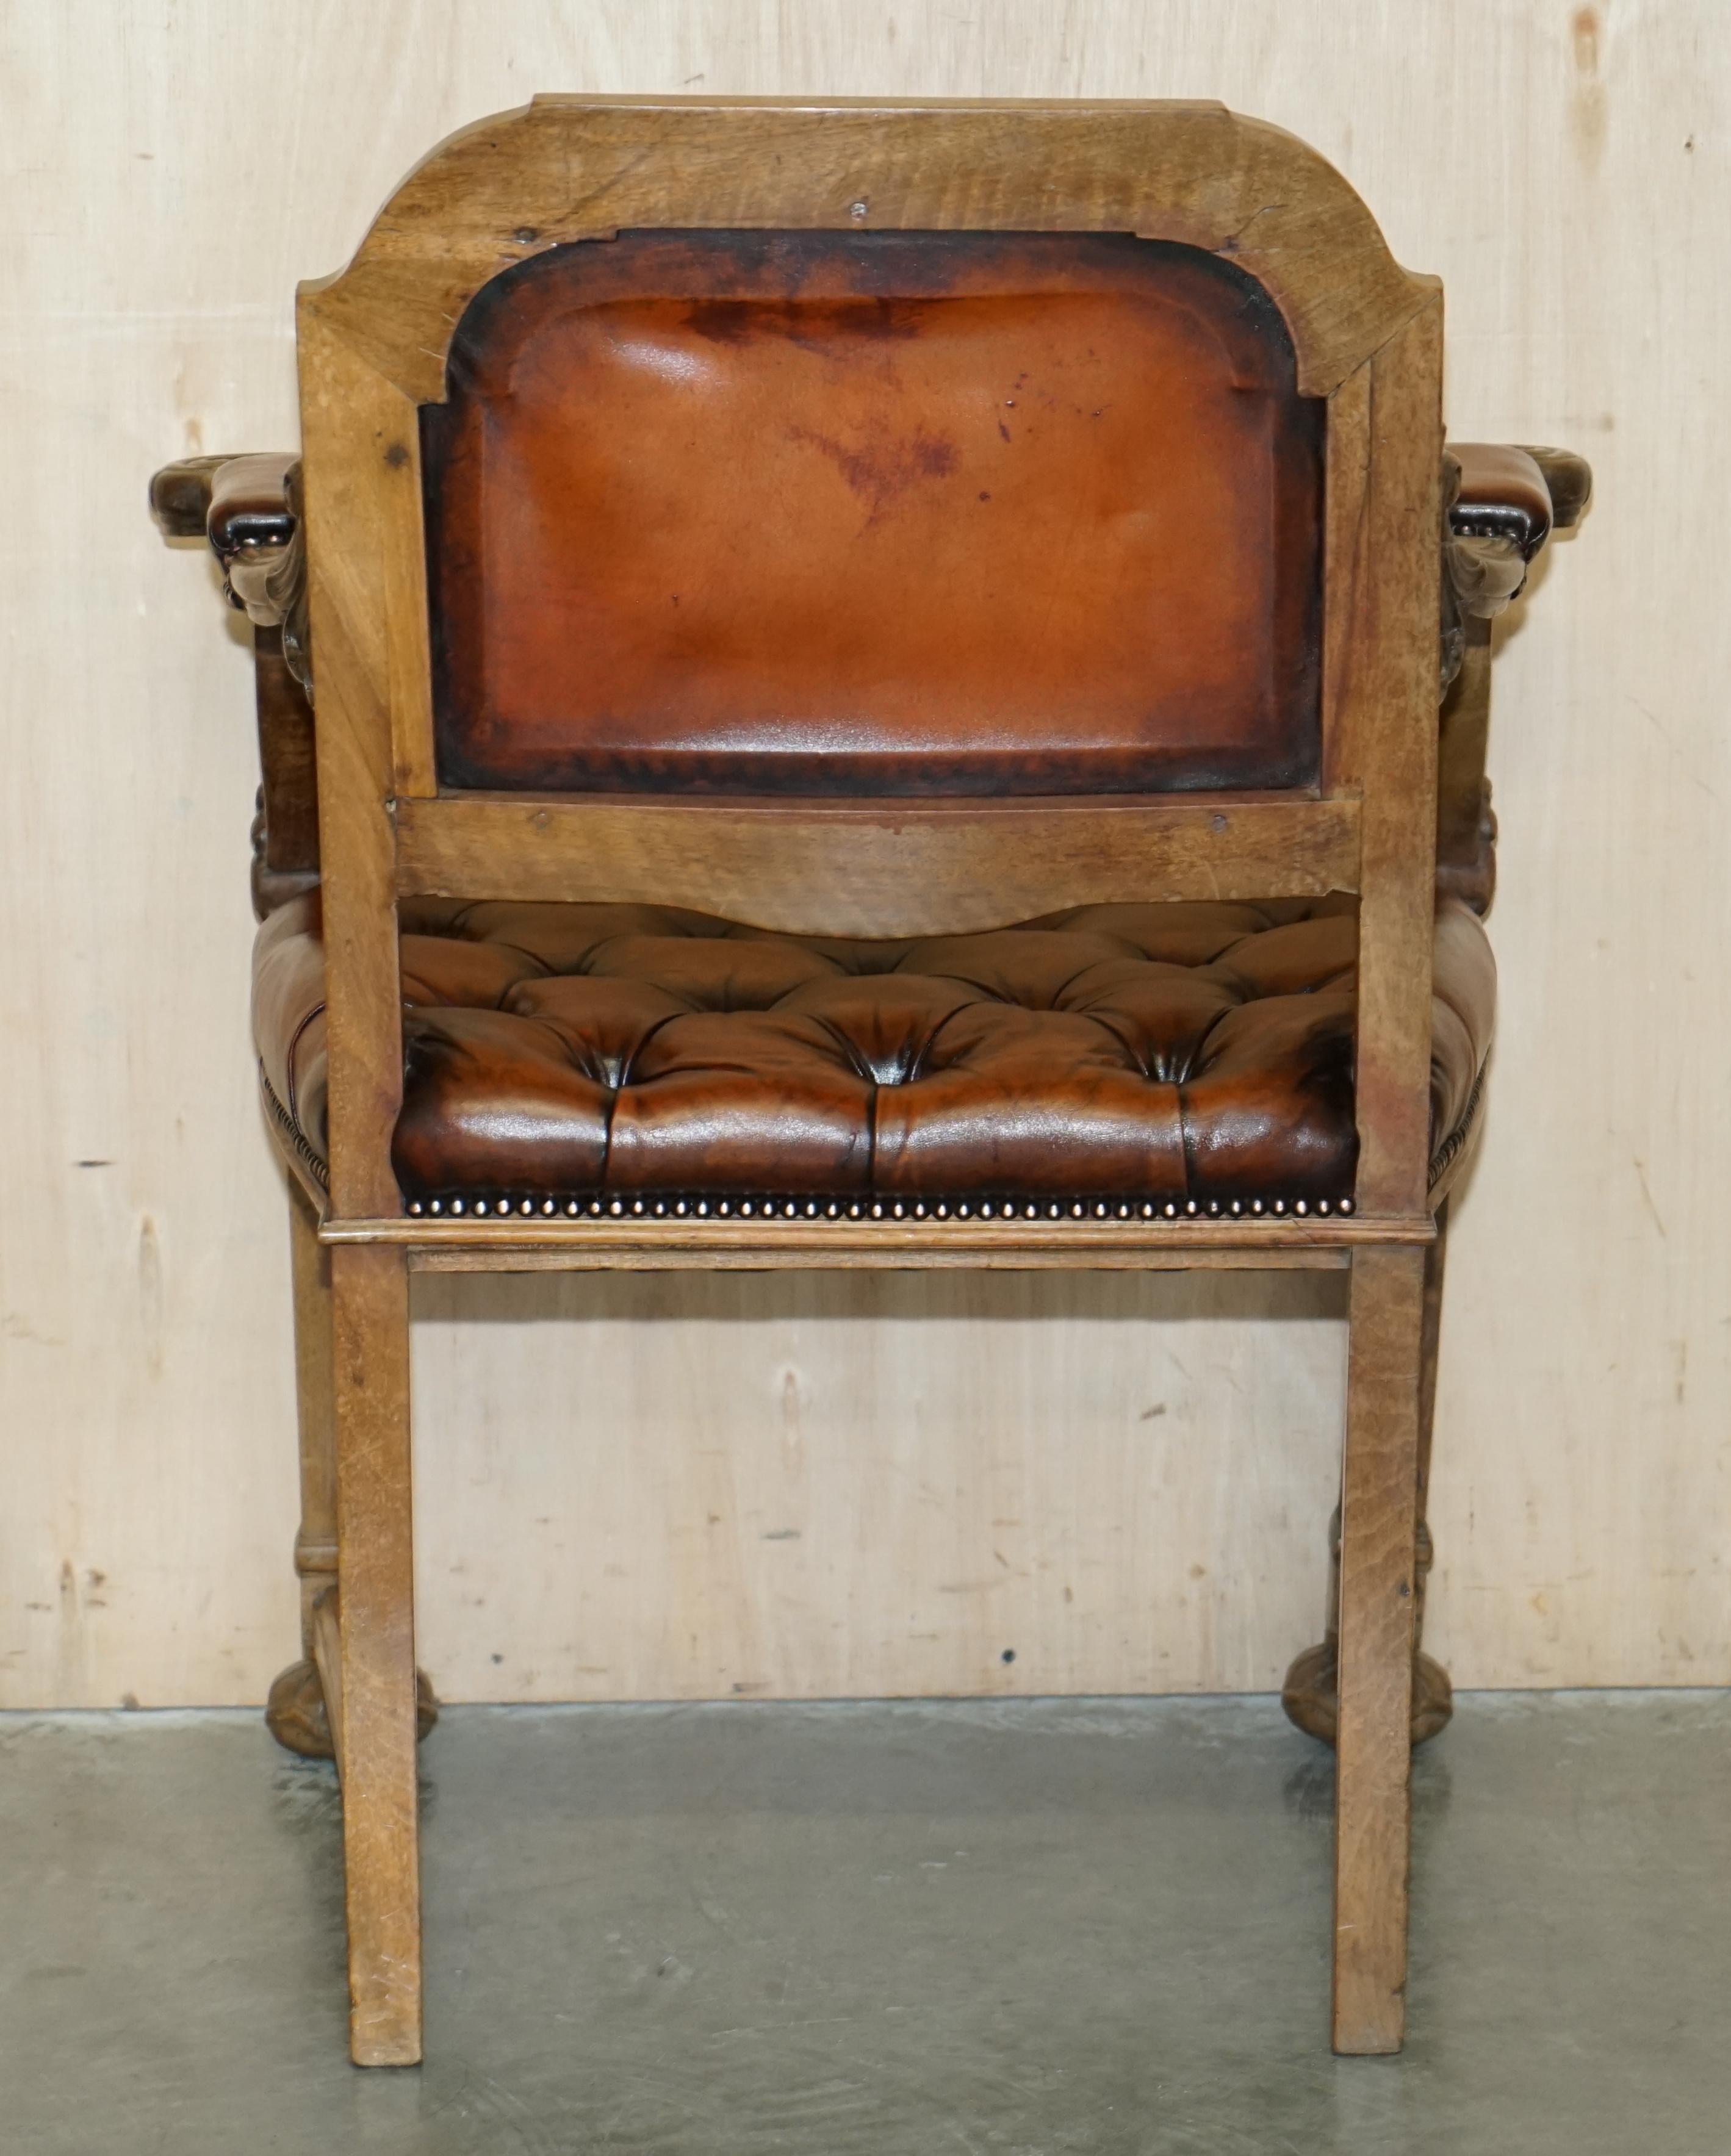 VERY FiNE RESTORED ANTIQUE CHESTERFIELD WILLIAM IV OAK BROWN LEATHER DESK CHAIr For Sale 9